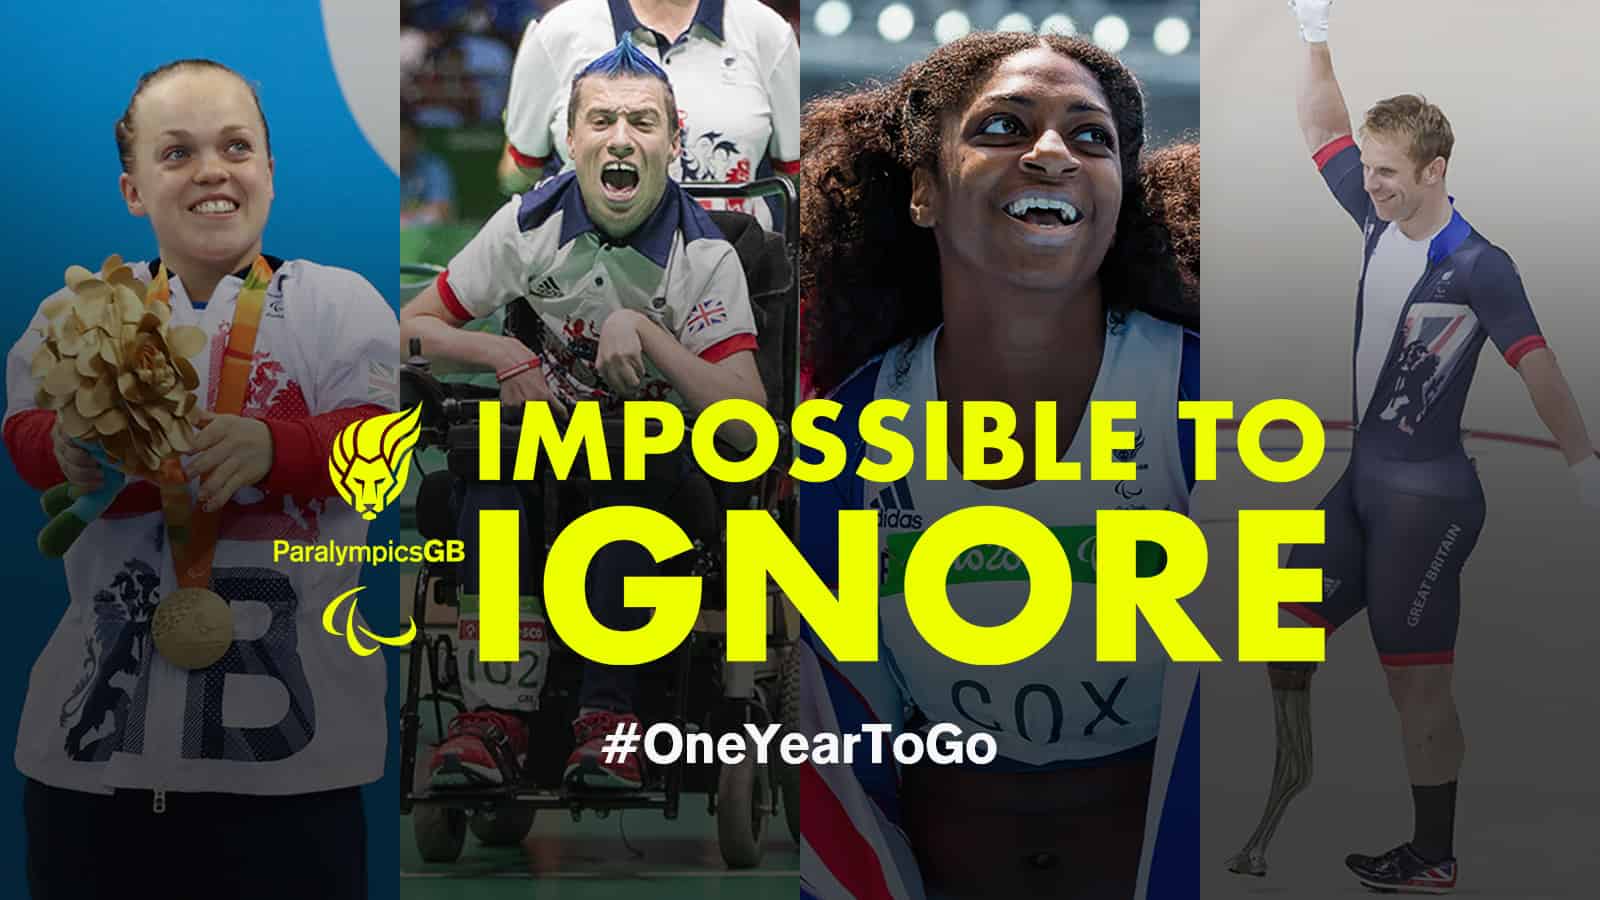 ParalympicsGB launches Impossible to Ignore